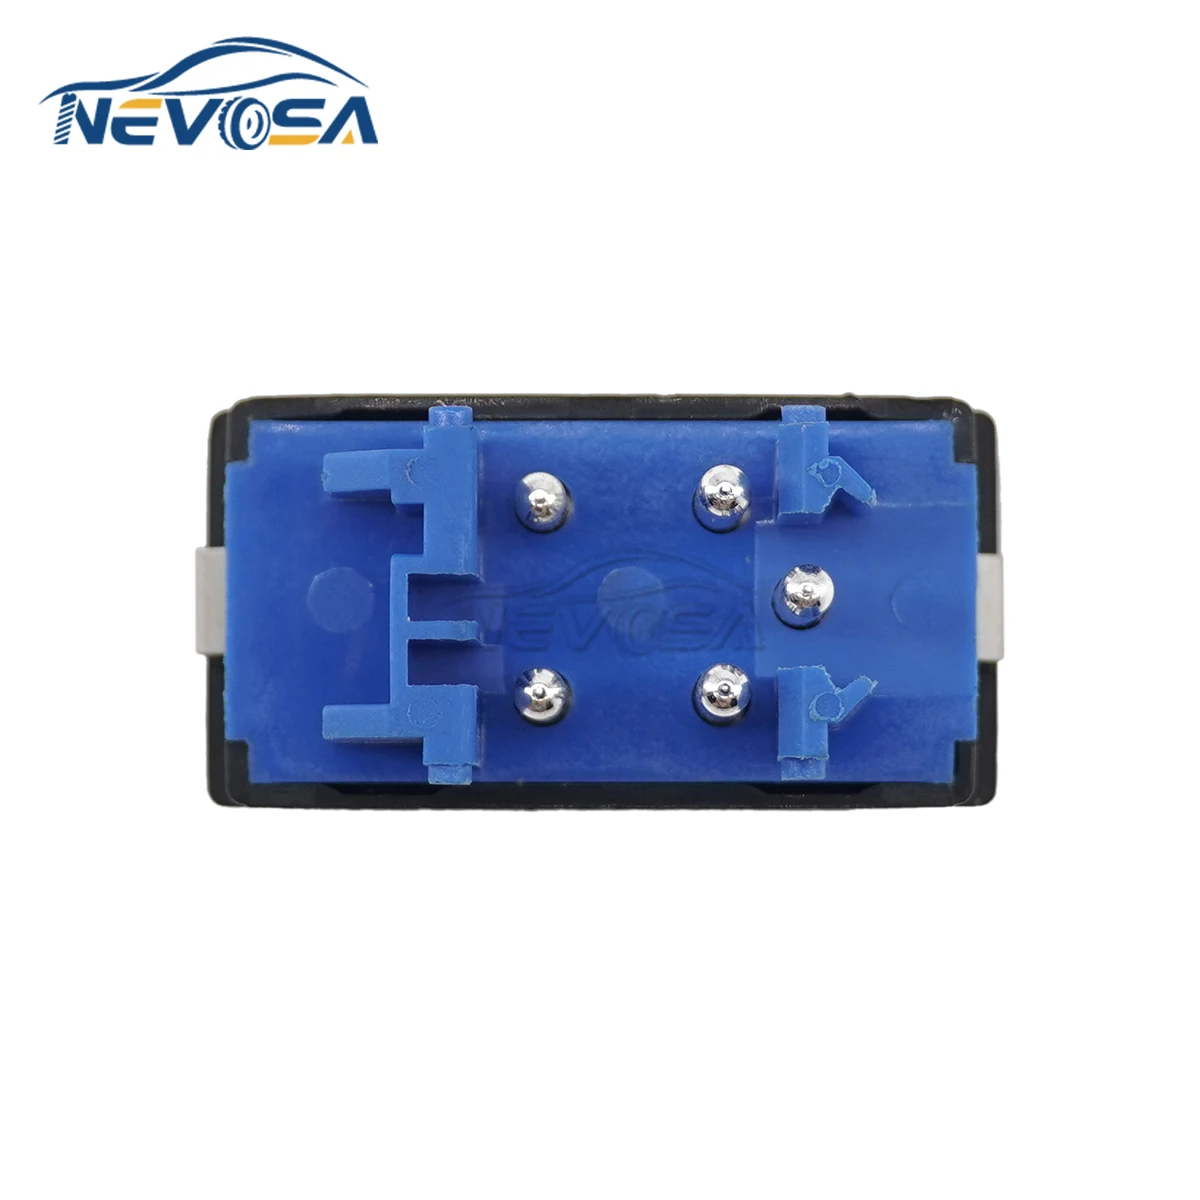 Nevosa 61311393361 Power Car Window Control Switch Lifter Button For BMW E36 3 Series 318iS 328i M3 Z3 Blue Base Car accessories images - 6